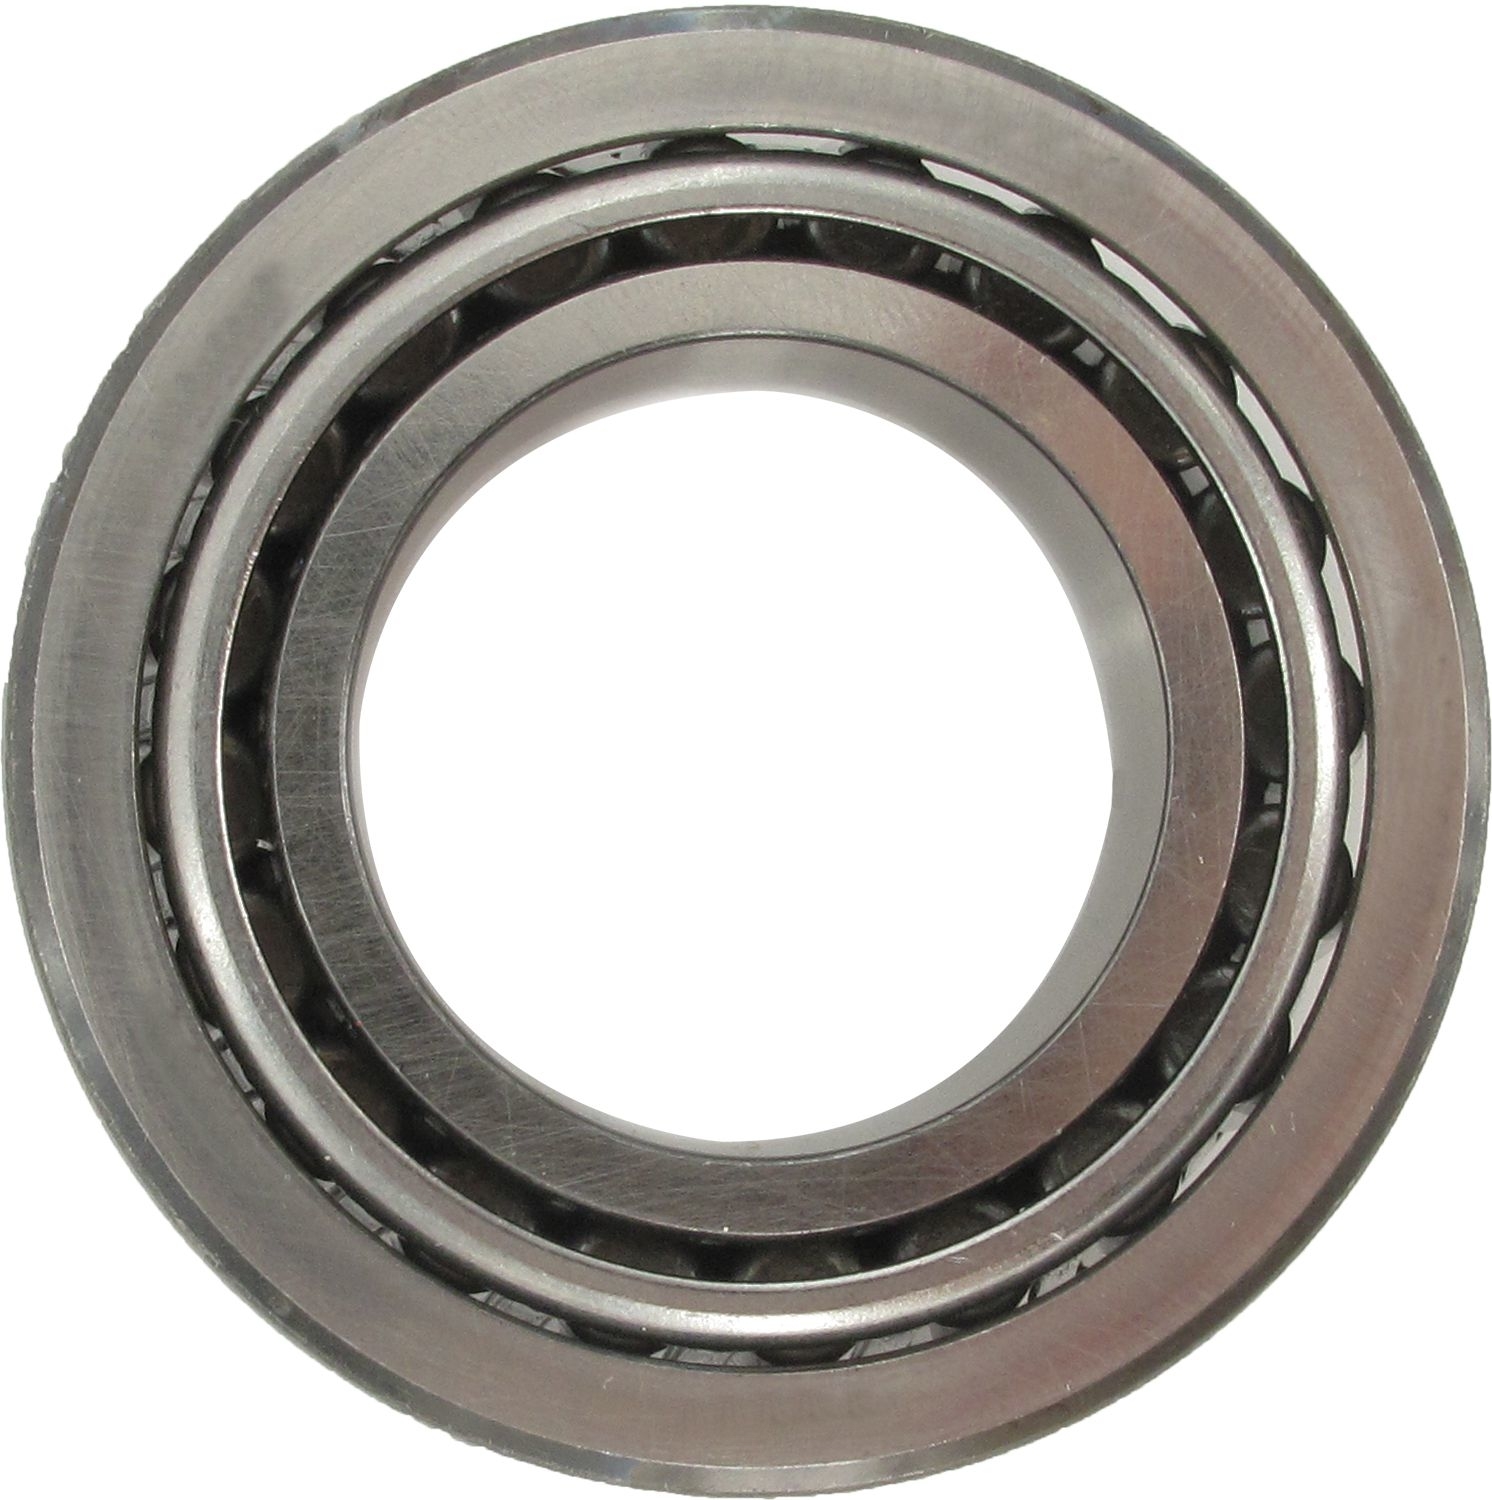 SKF (CHICAGO RAWHIDE) - Differential Pinion Bearing (Front) - SKF BR6 VP